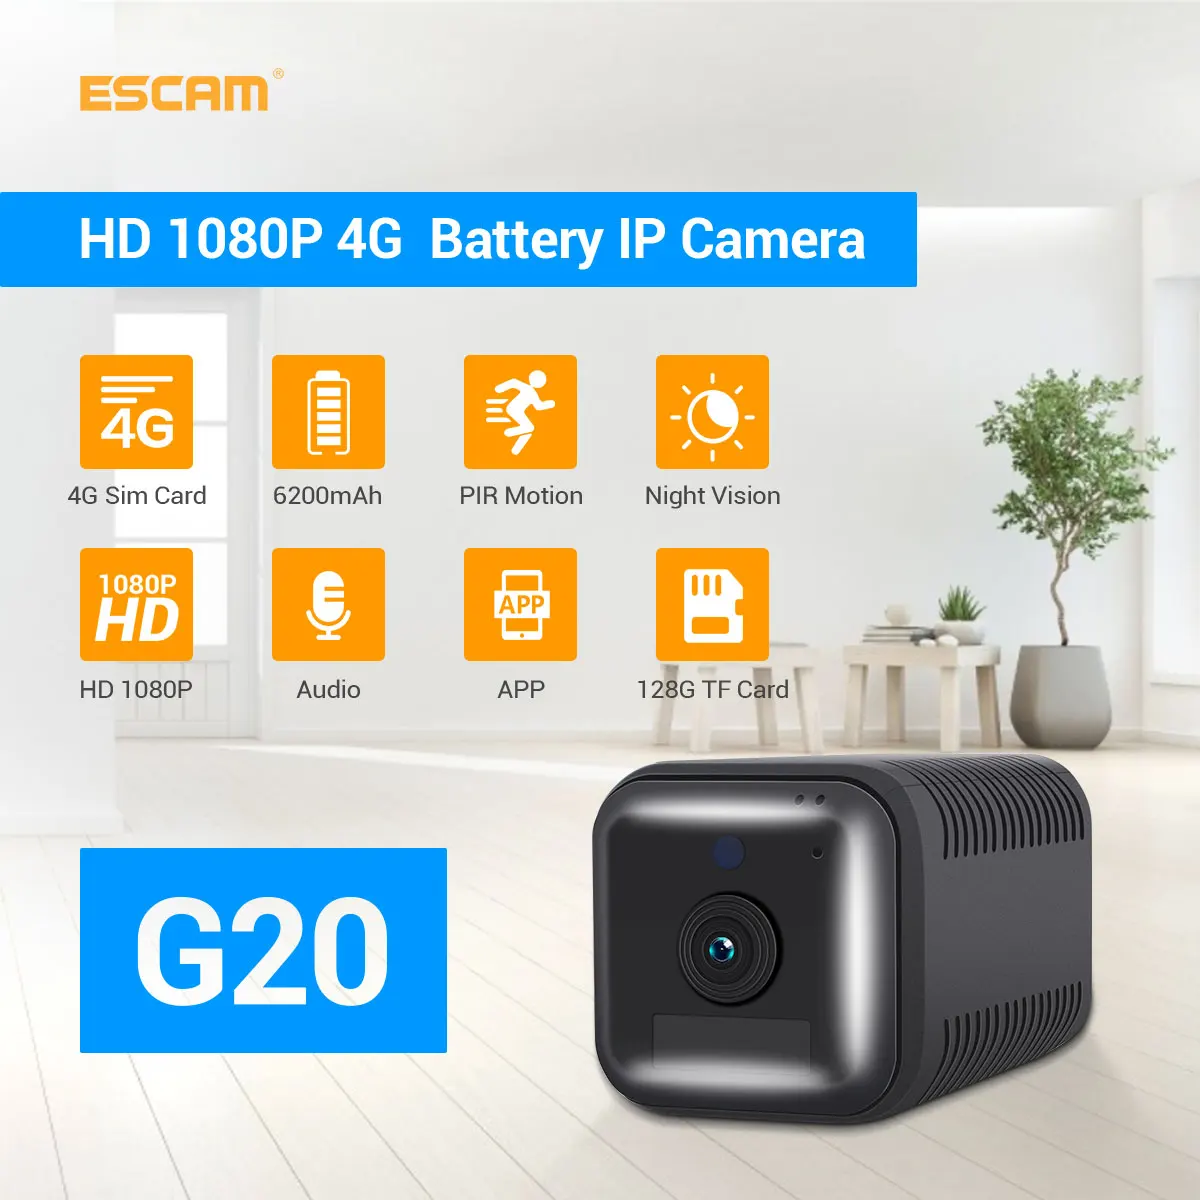 ESCAM G20 2MP 1080P Full HD Rechargeable Battery  PIR Alarm 4G life Sim Camera for Euro Country Security CCTV Monitor, 